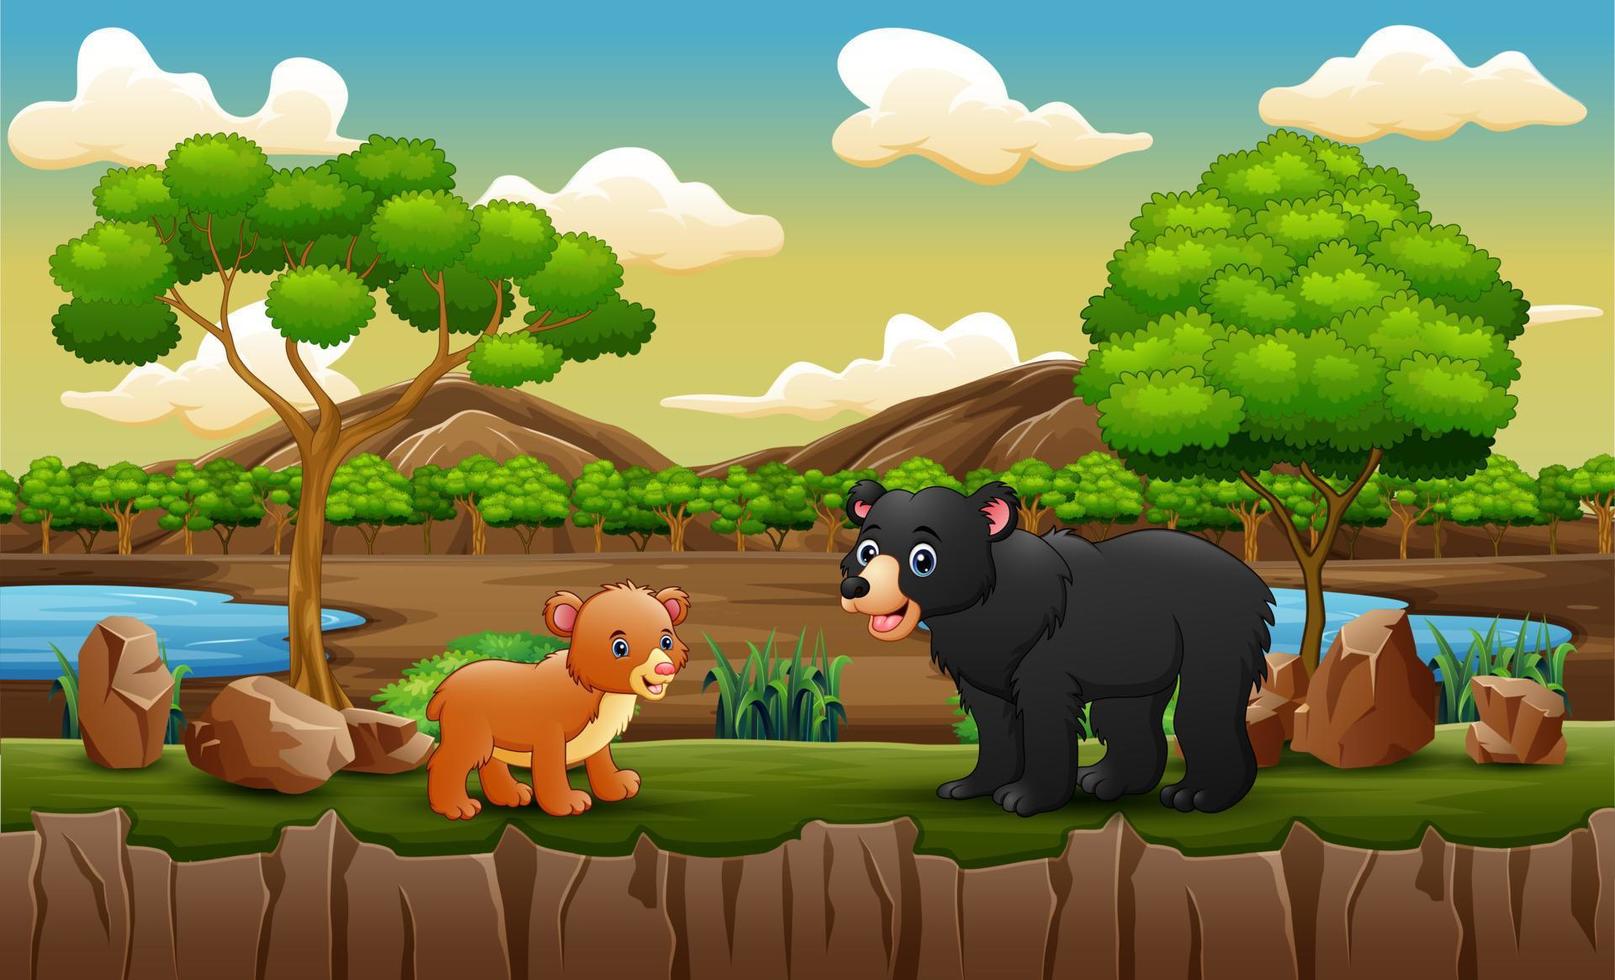 Adult bear and baby bear at the open zoo vector